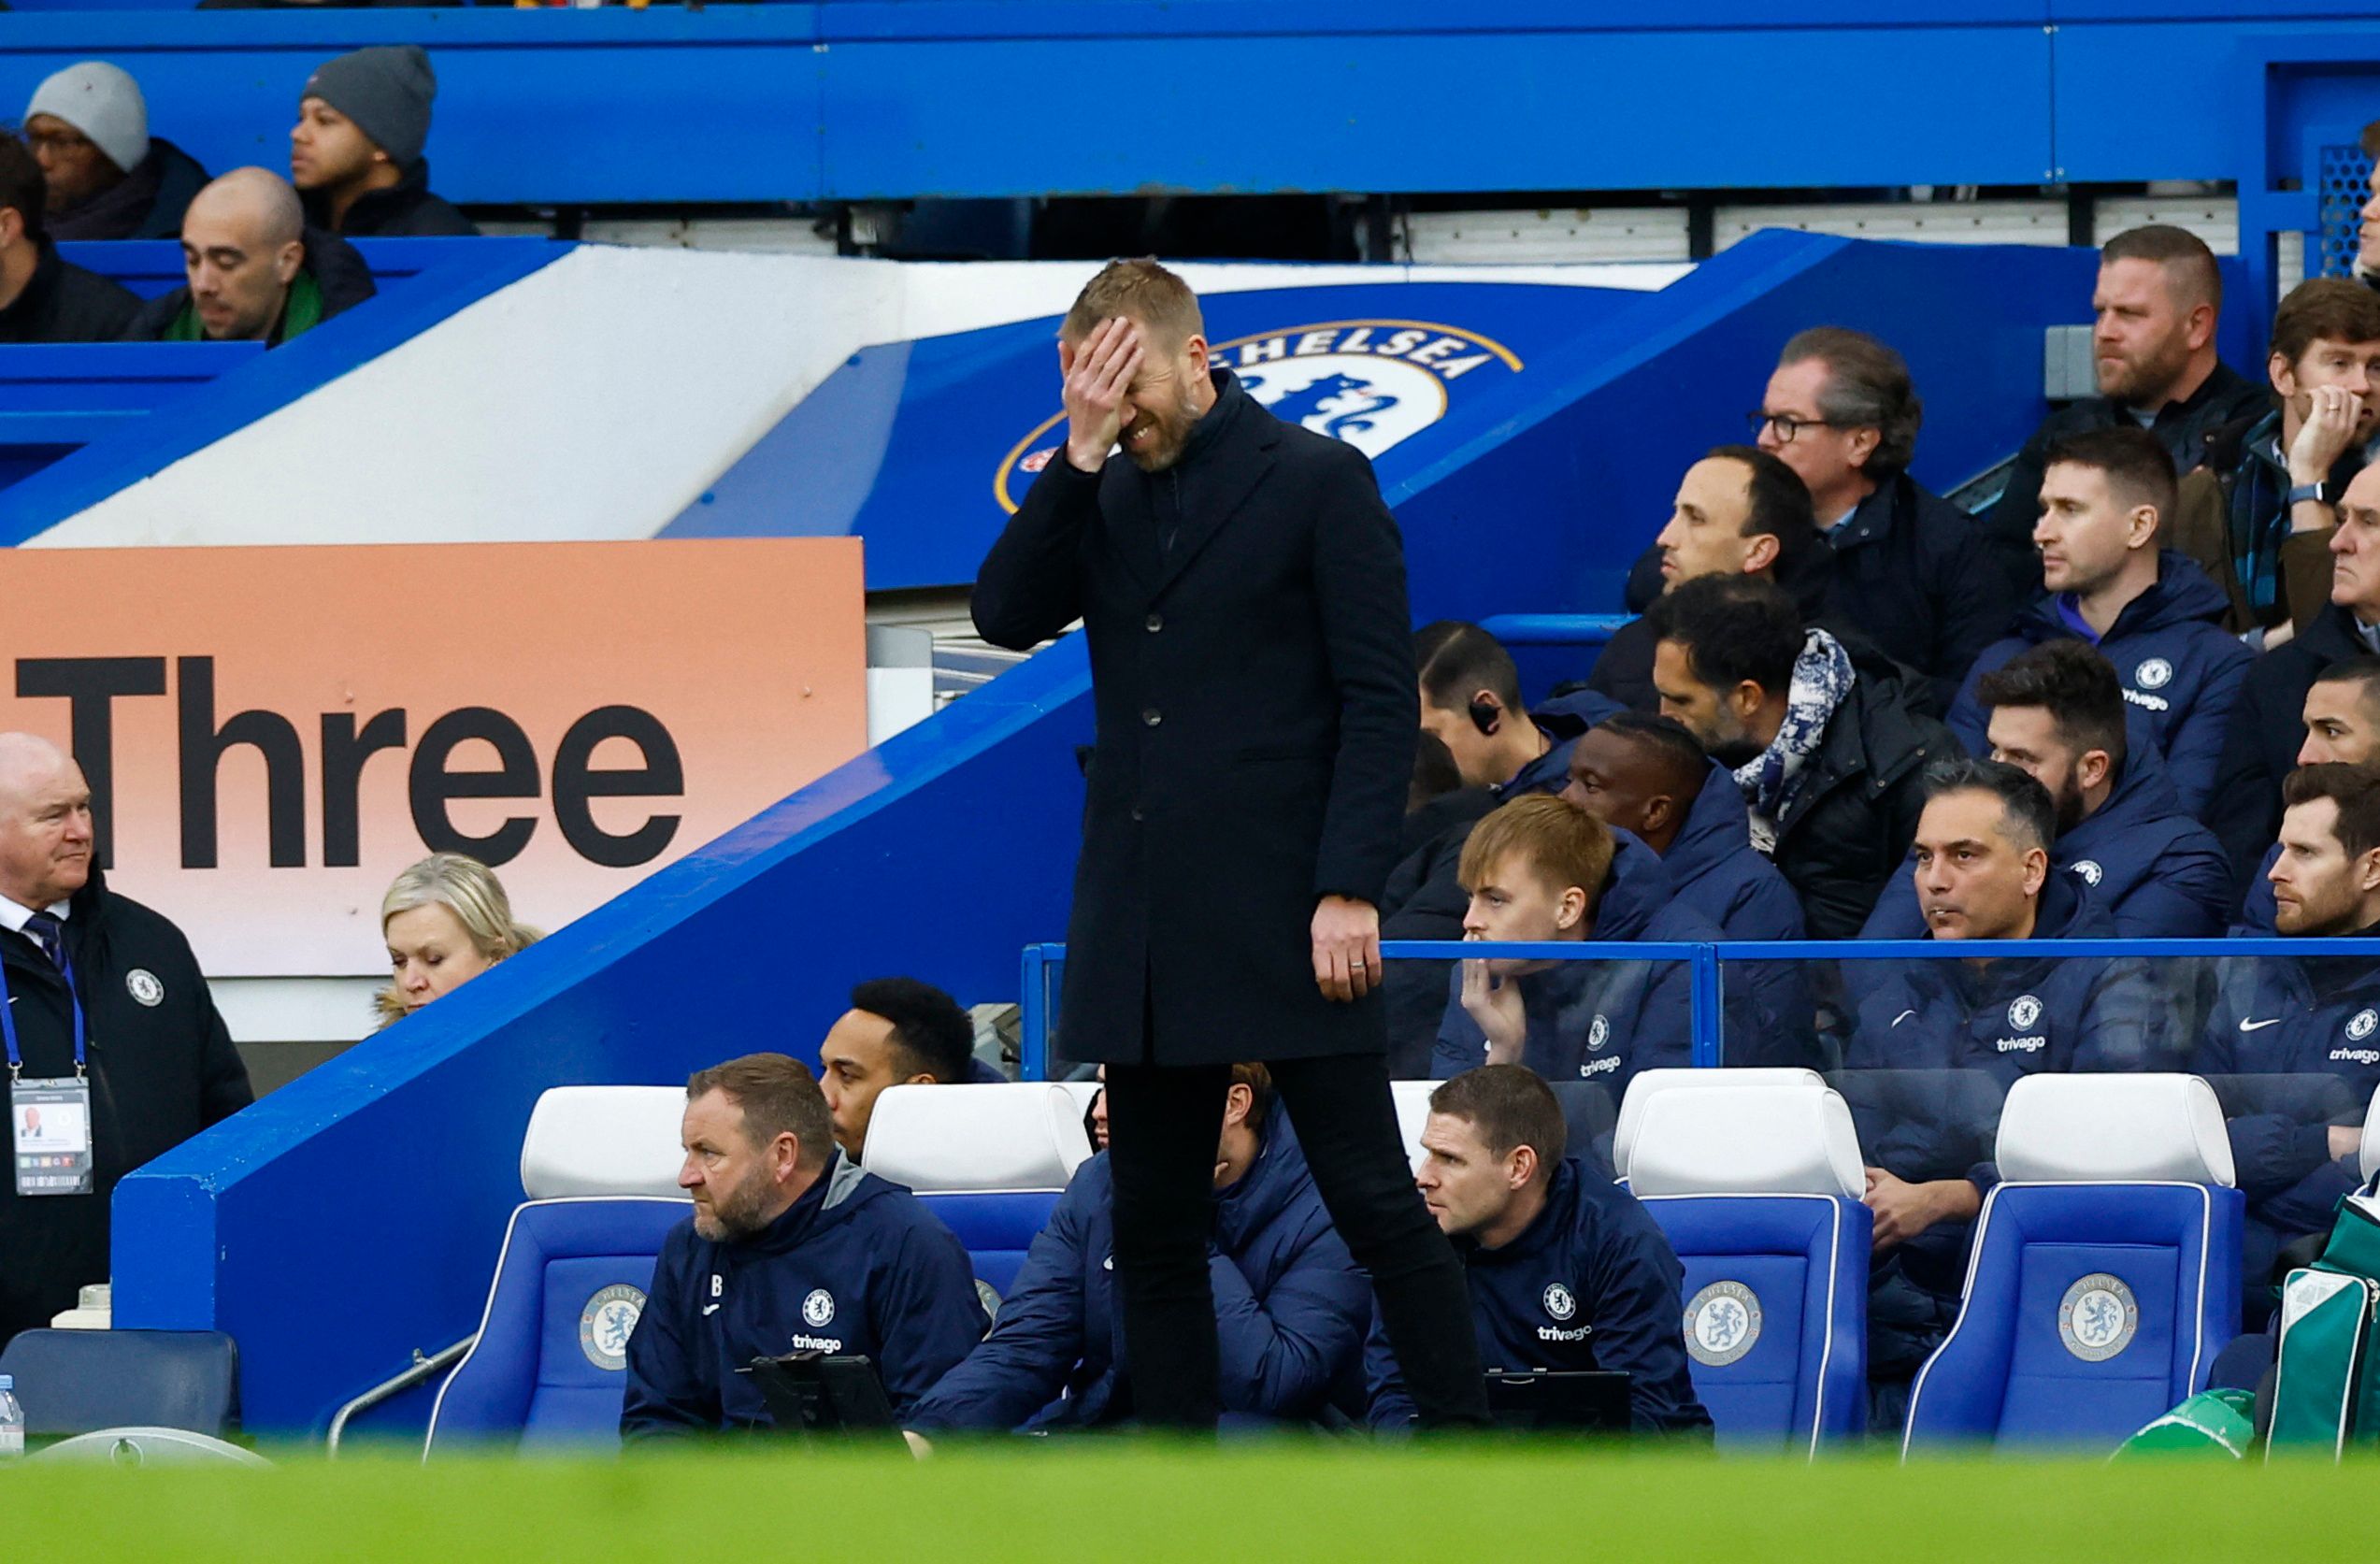 Chelsea manager Graham Potter reacts to moment during game